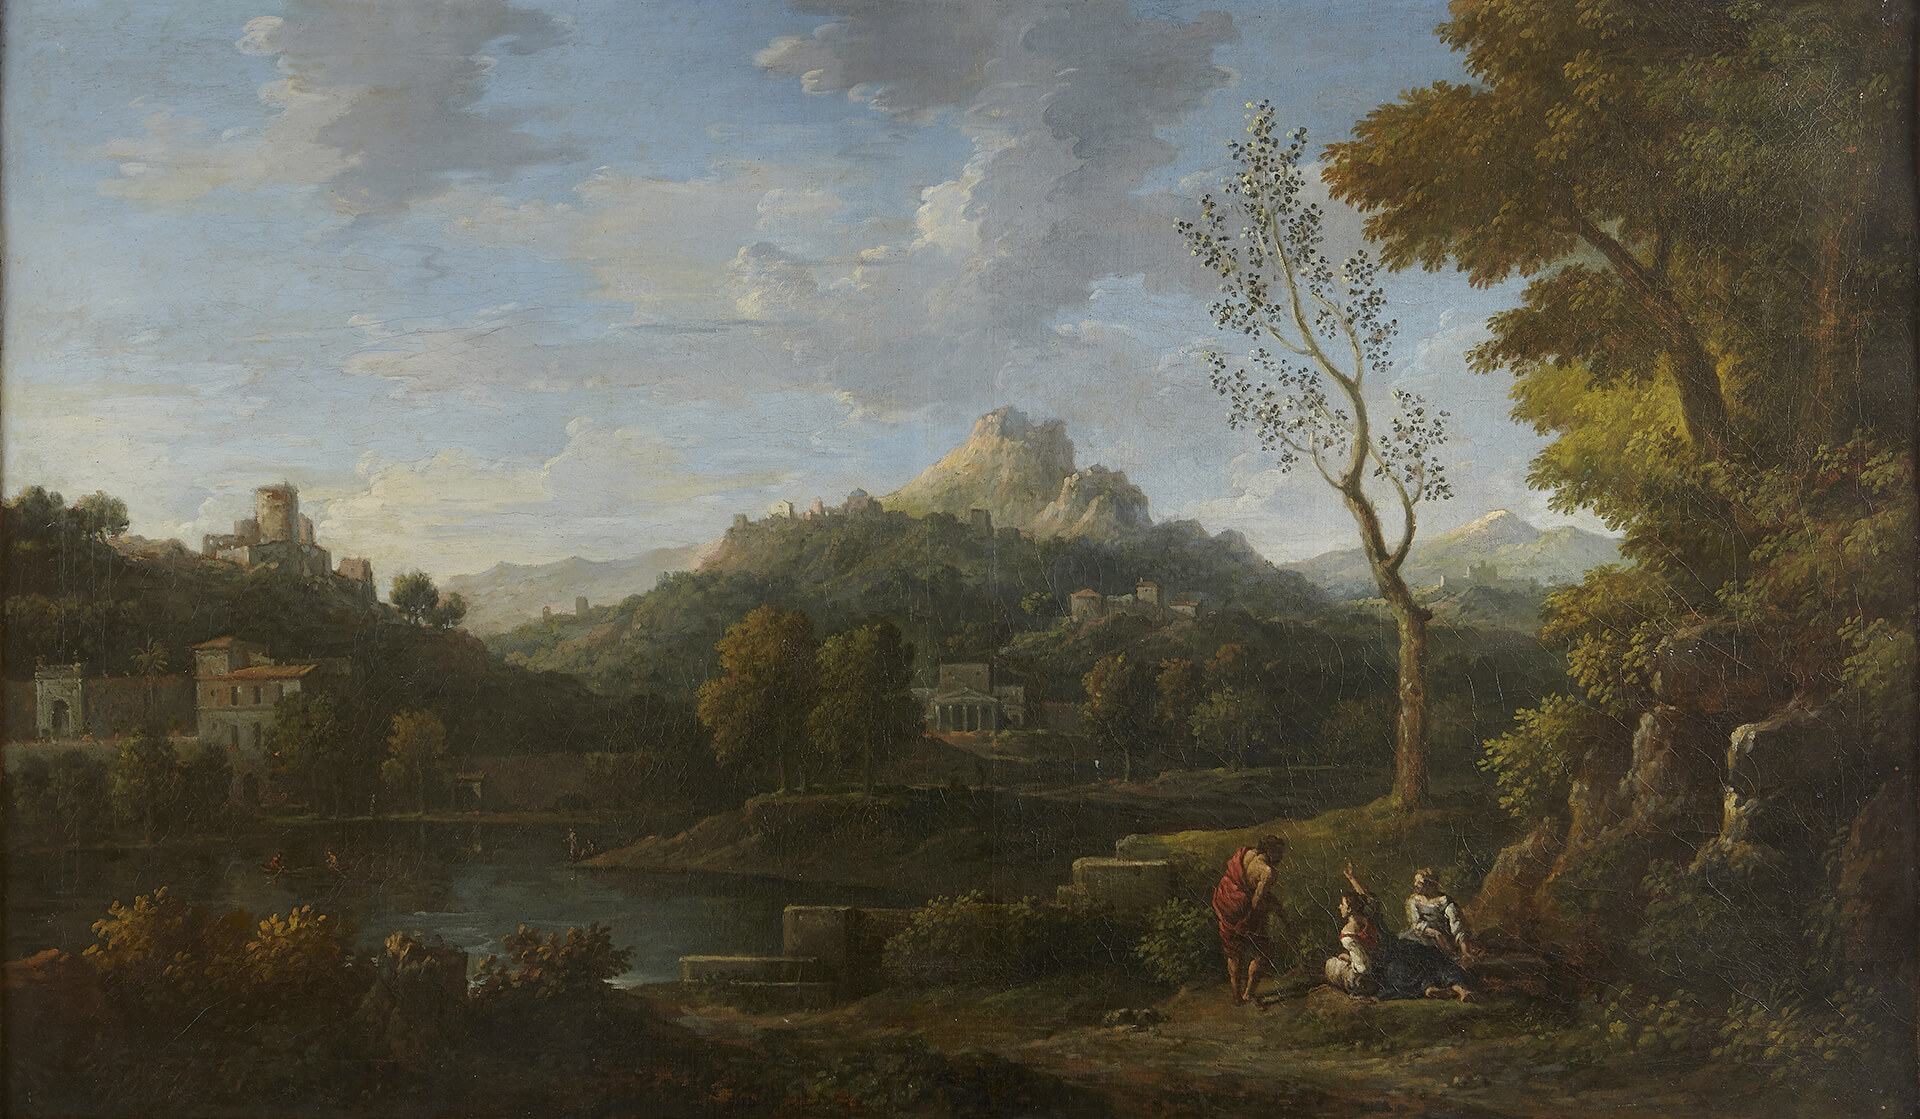 Landscape with figures and a small lake